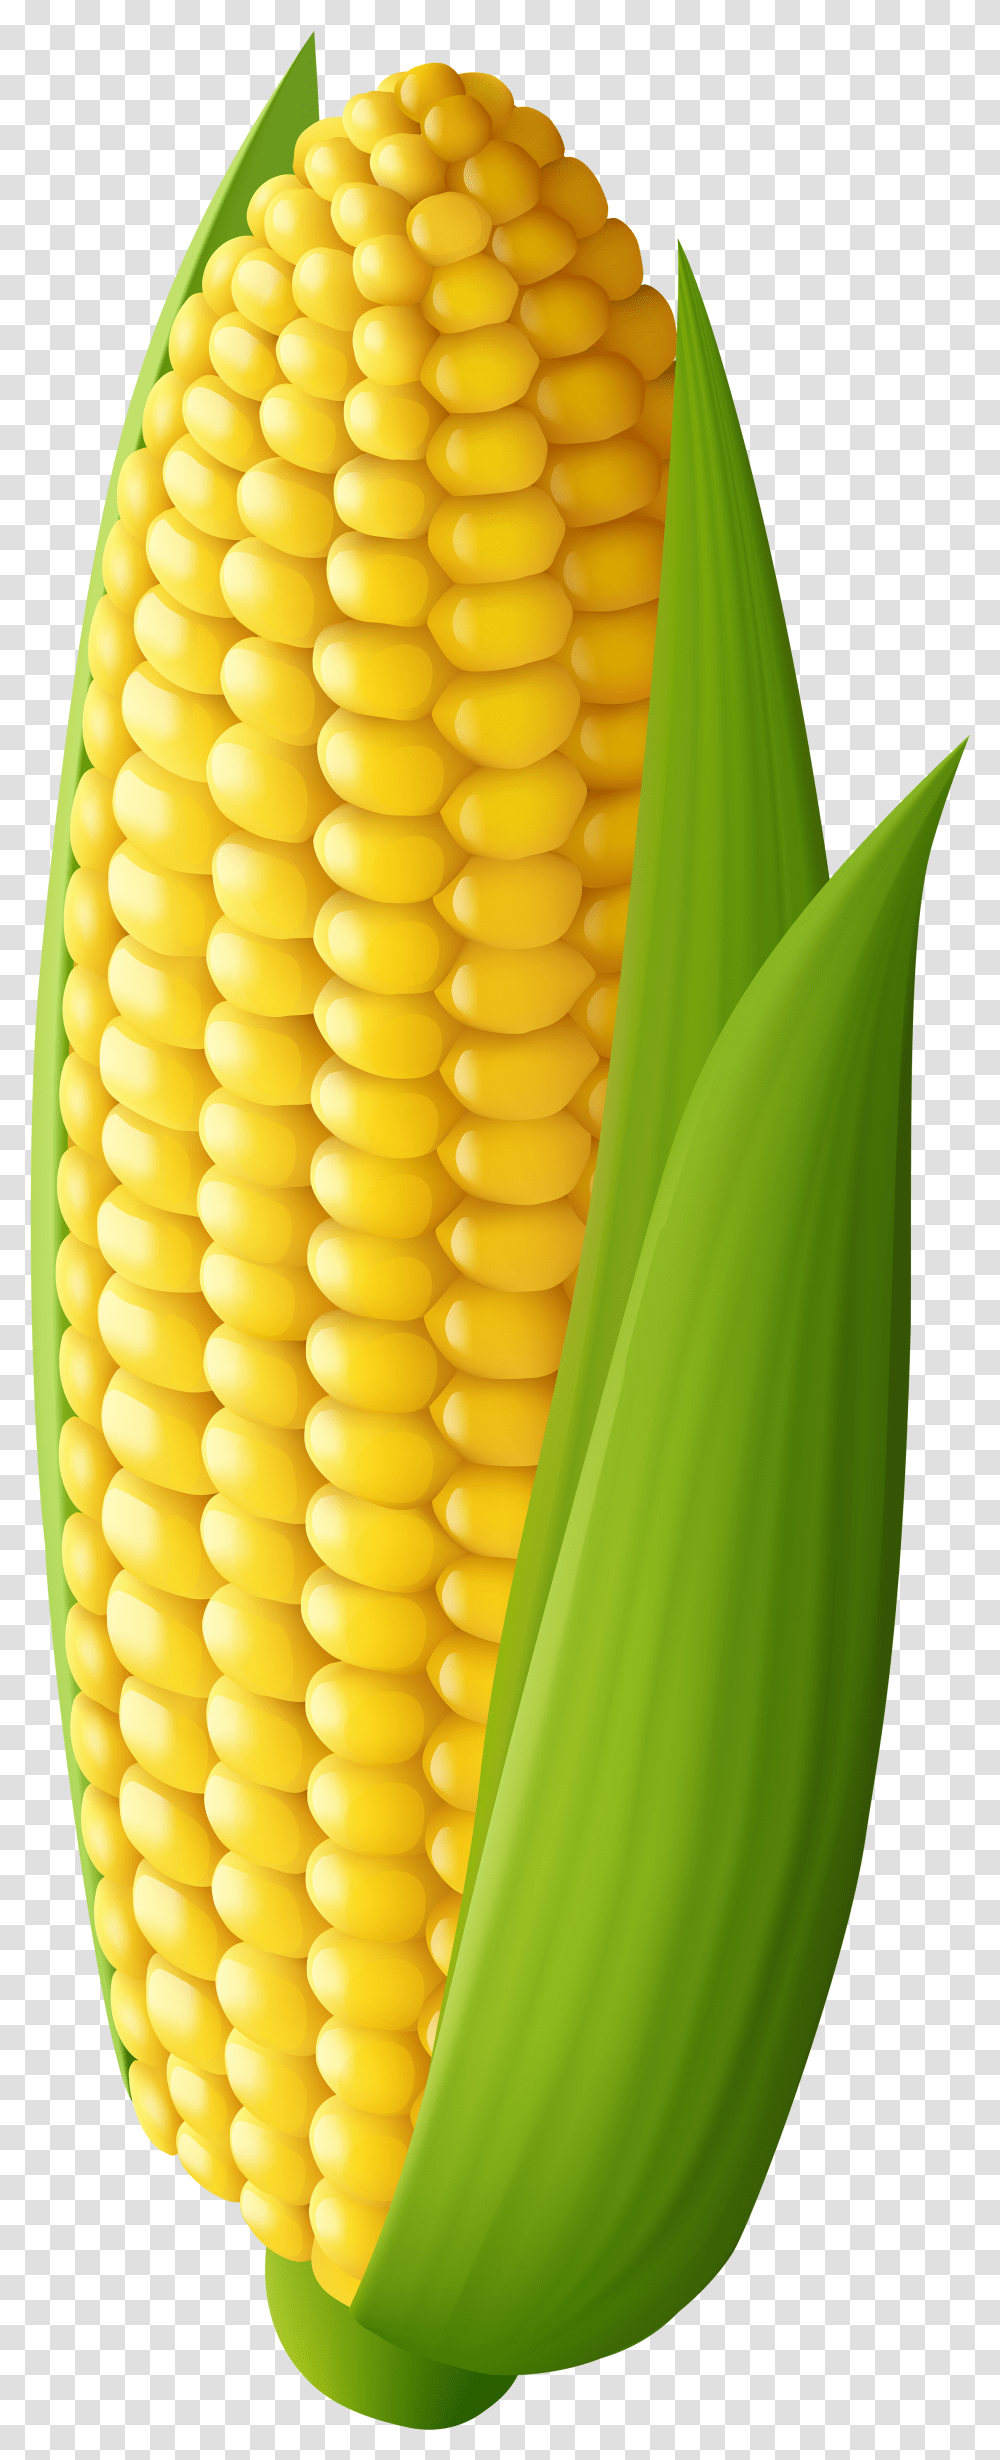 Download Free Corn Background Corn On The Cob Clip Art Transparent Png